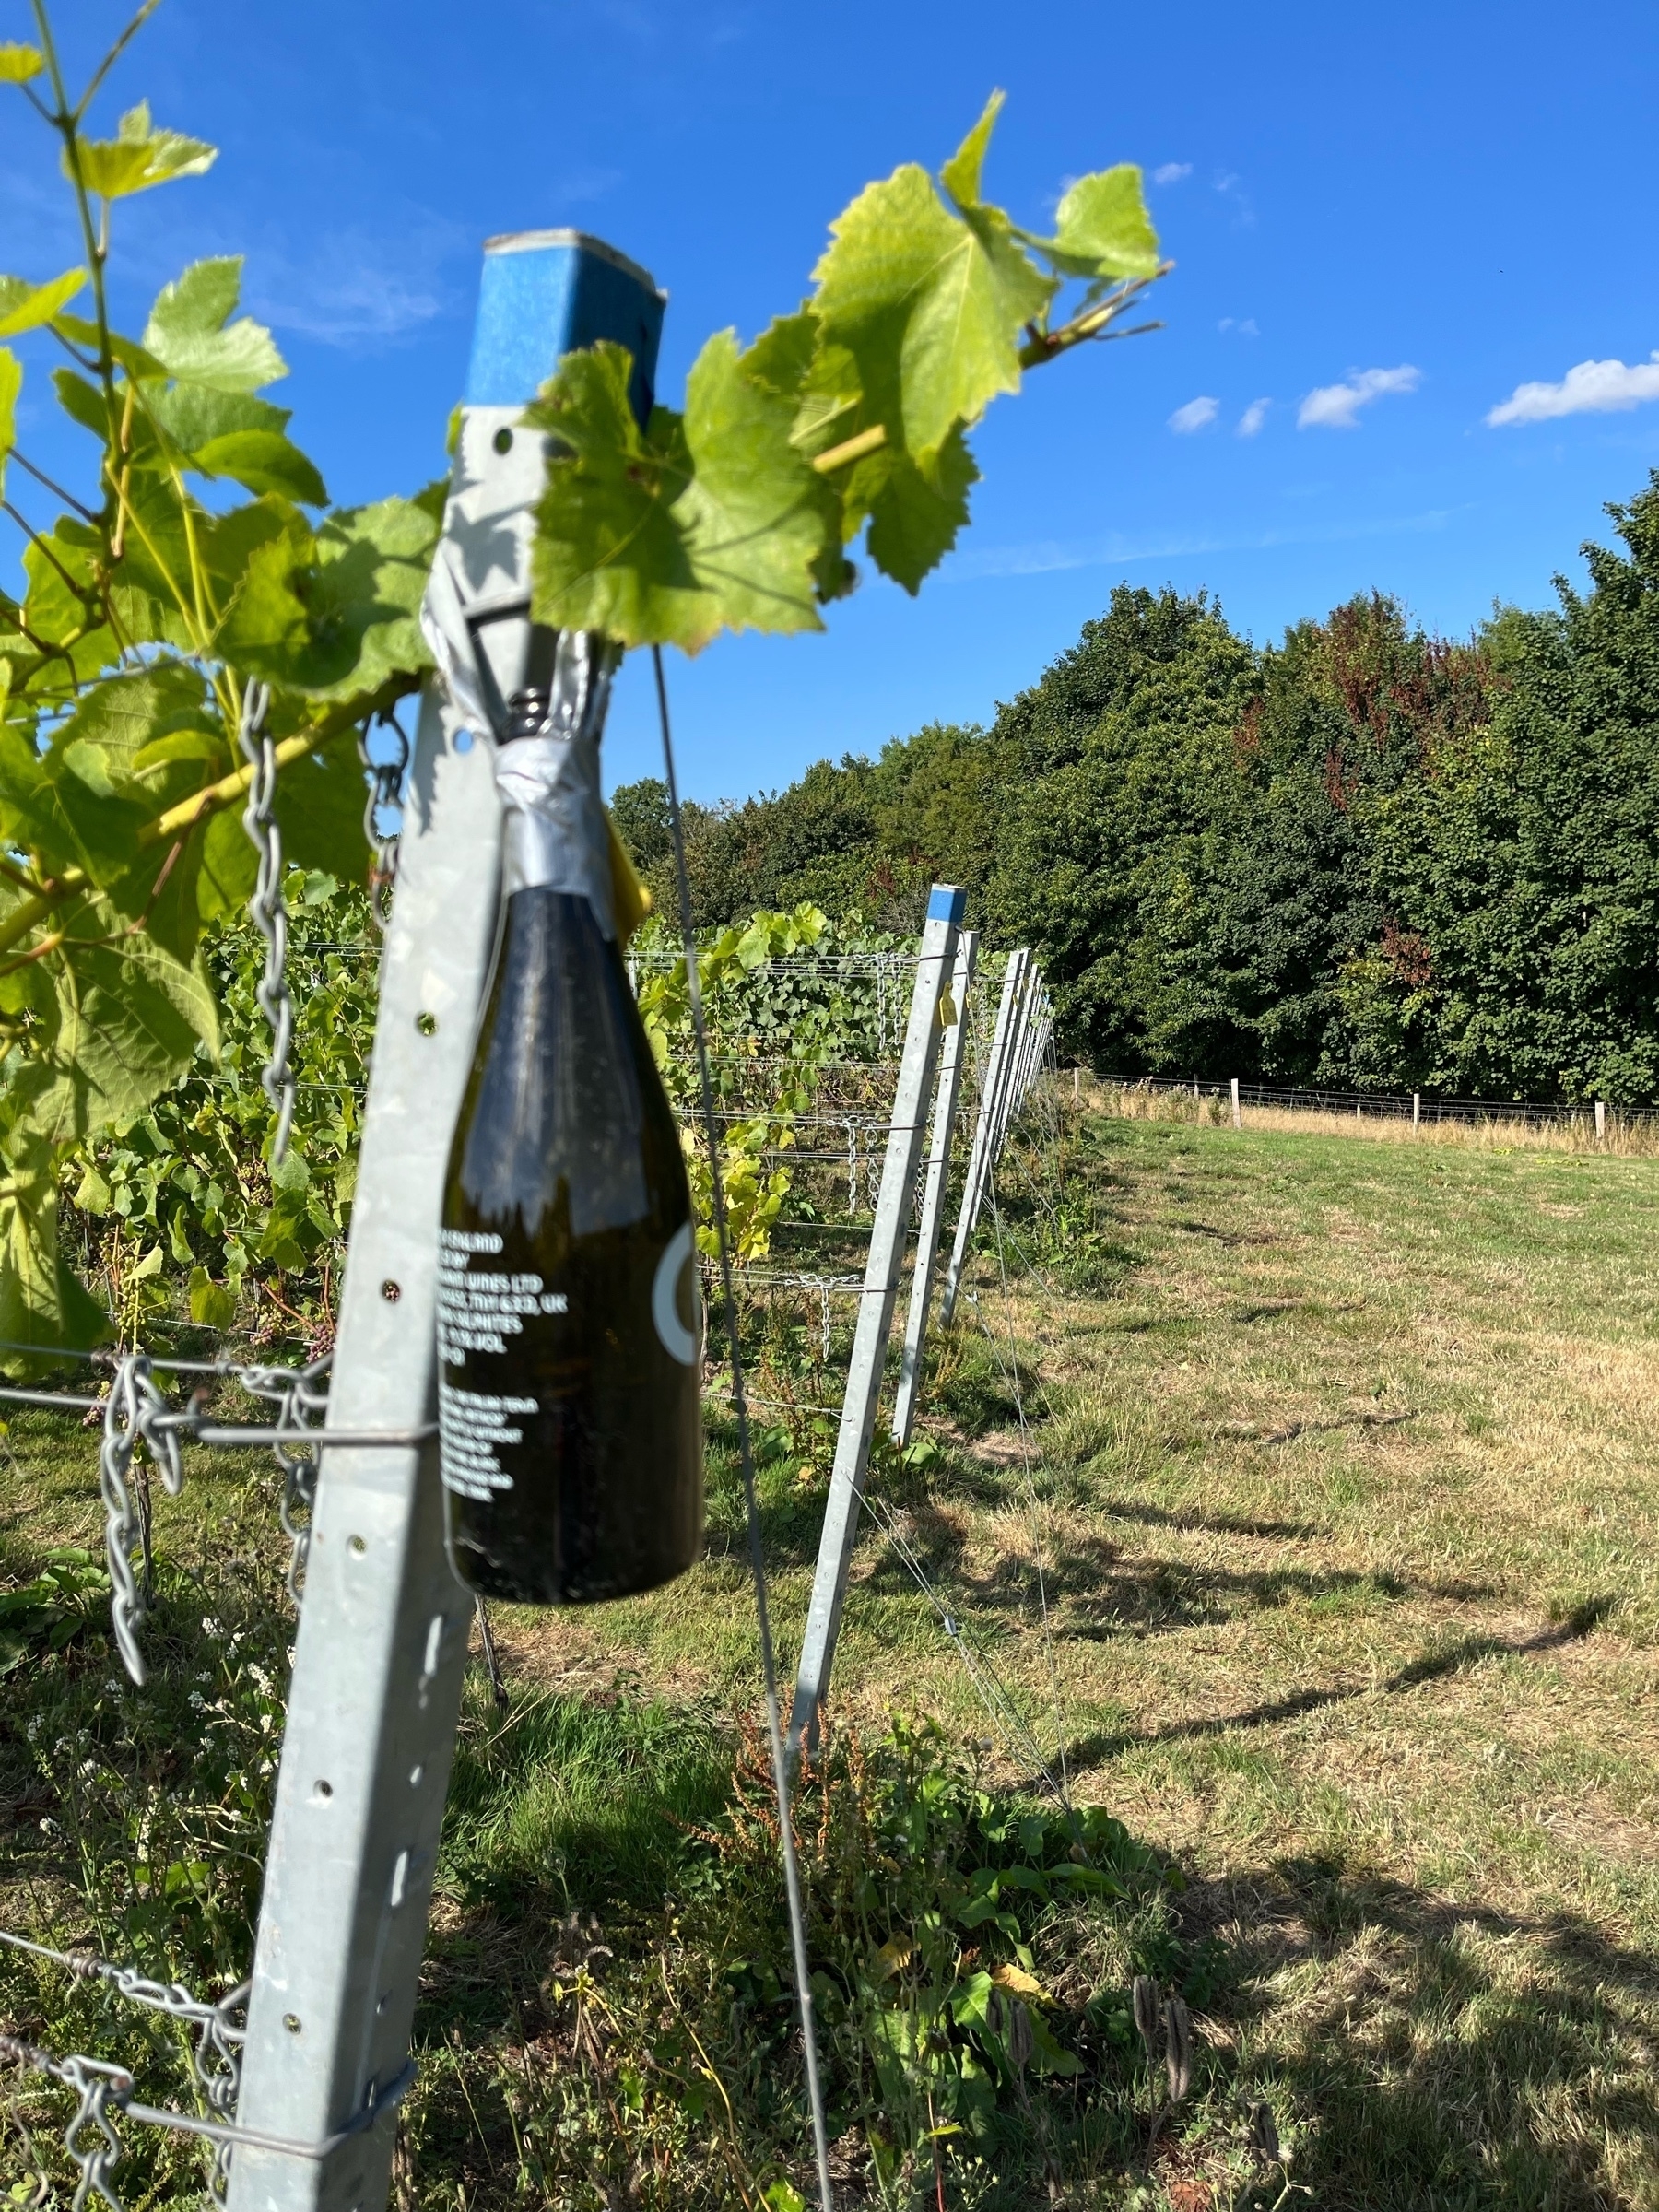 Winery field with a bottle handing on the side of a metal end of the wine row